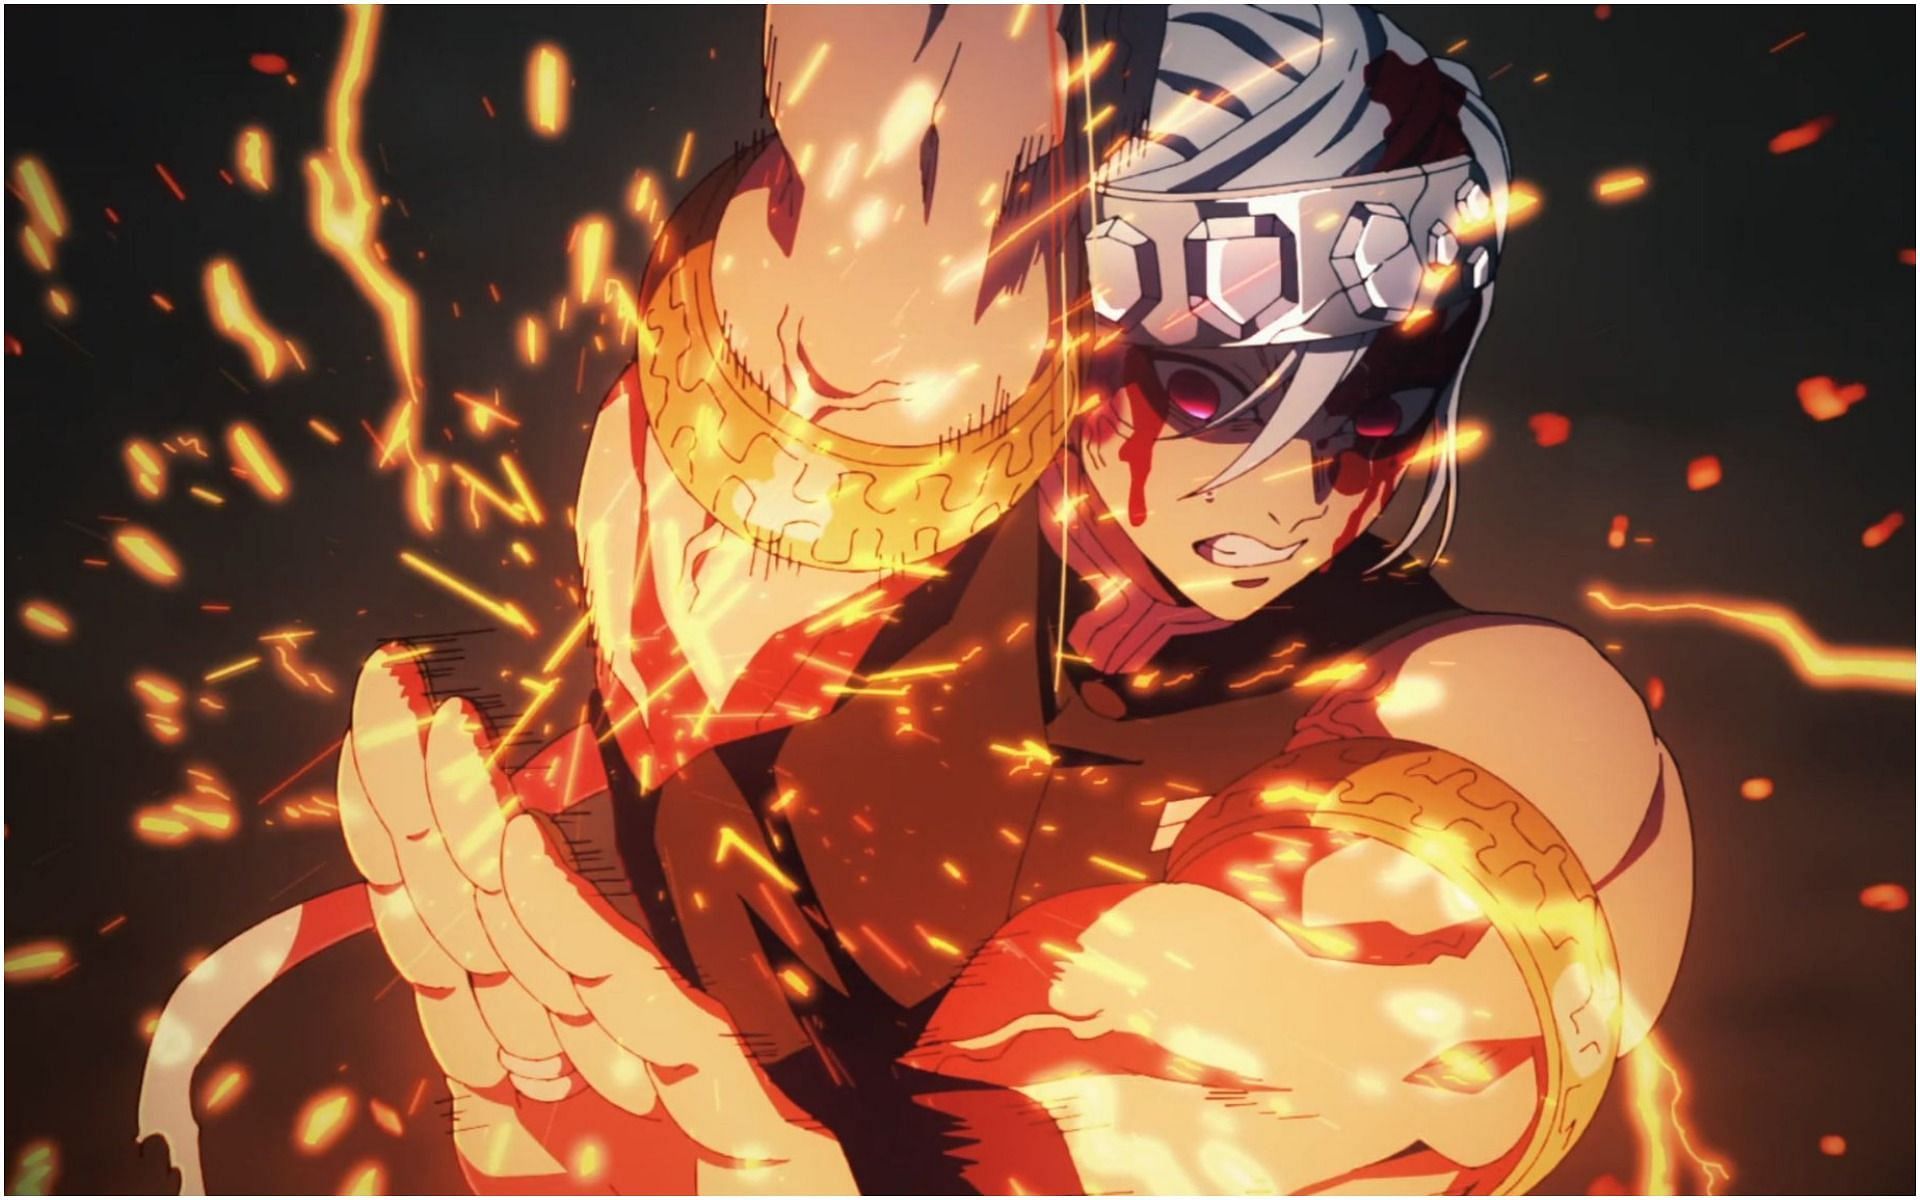 most intense fights in Demon Slayer, ranked